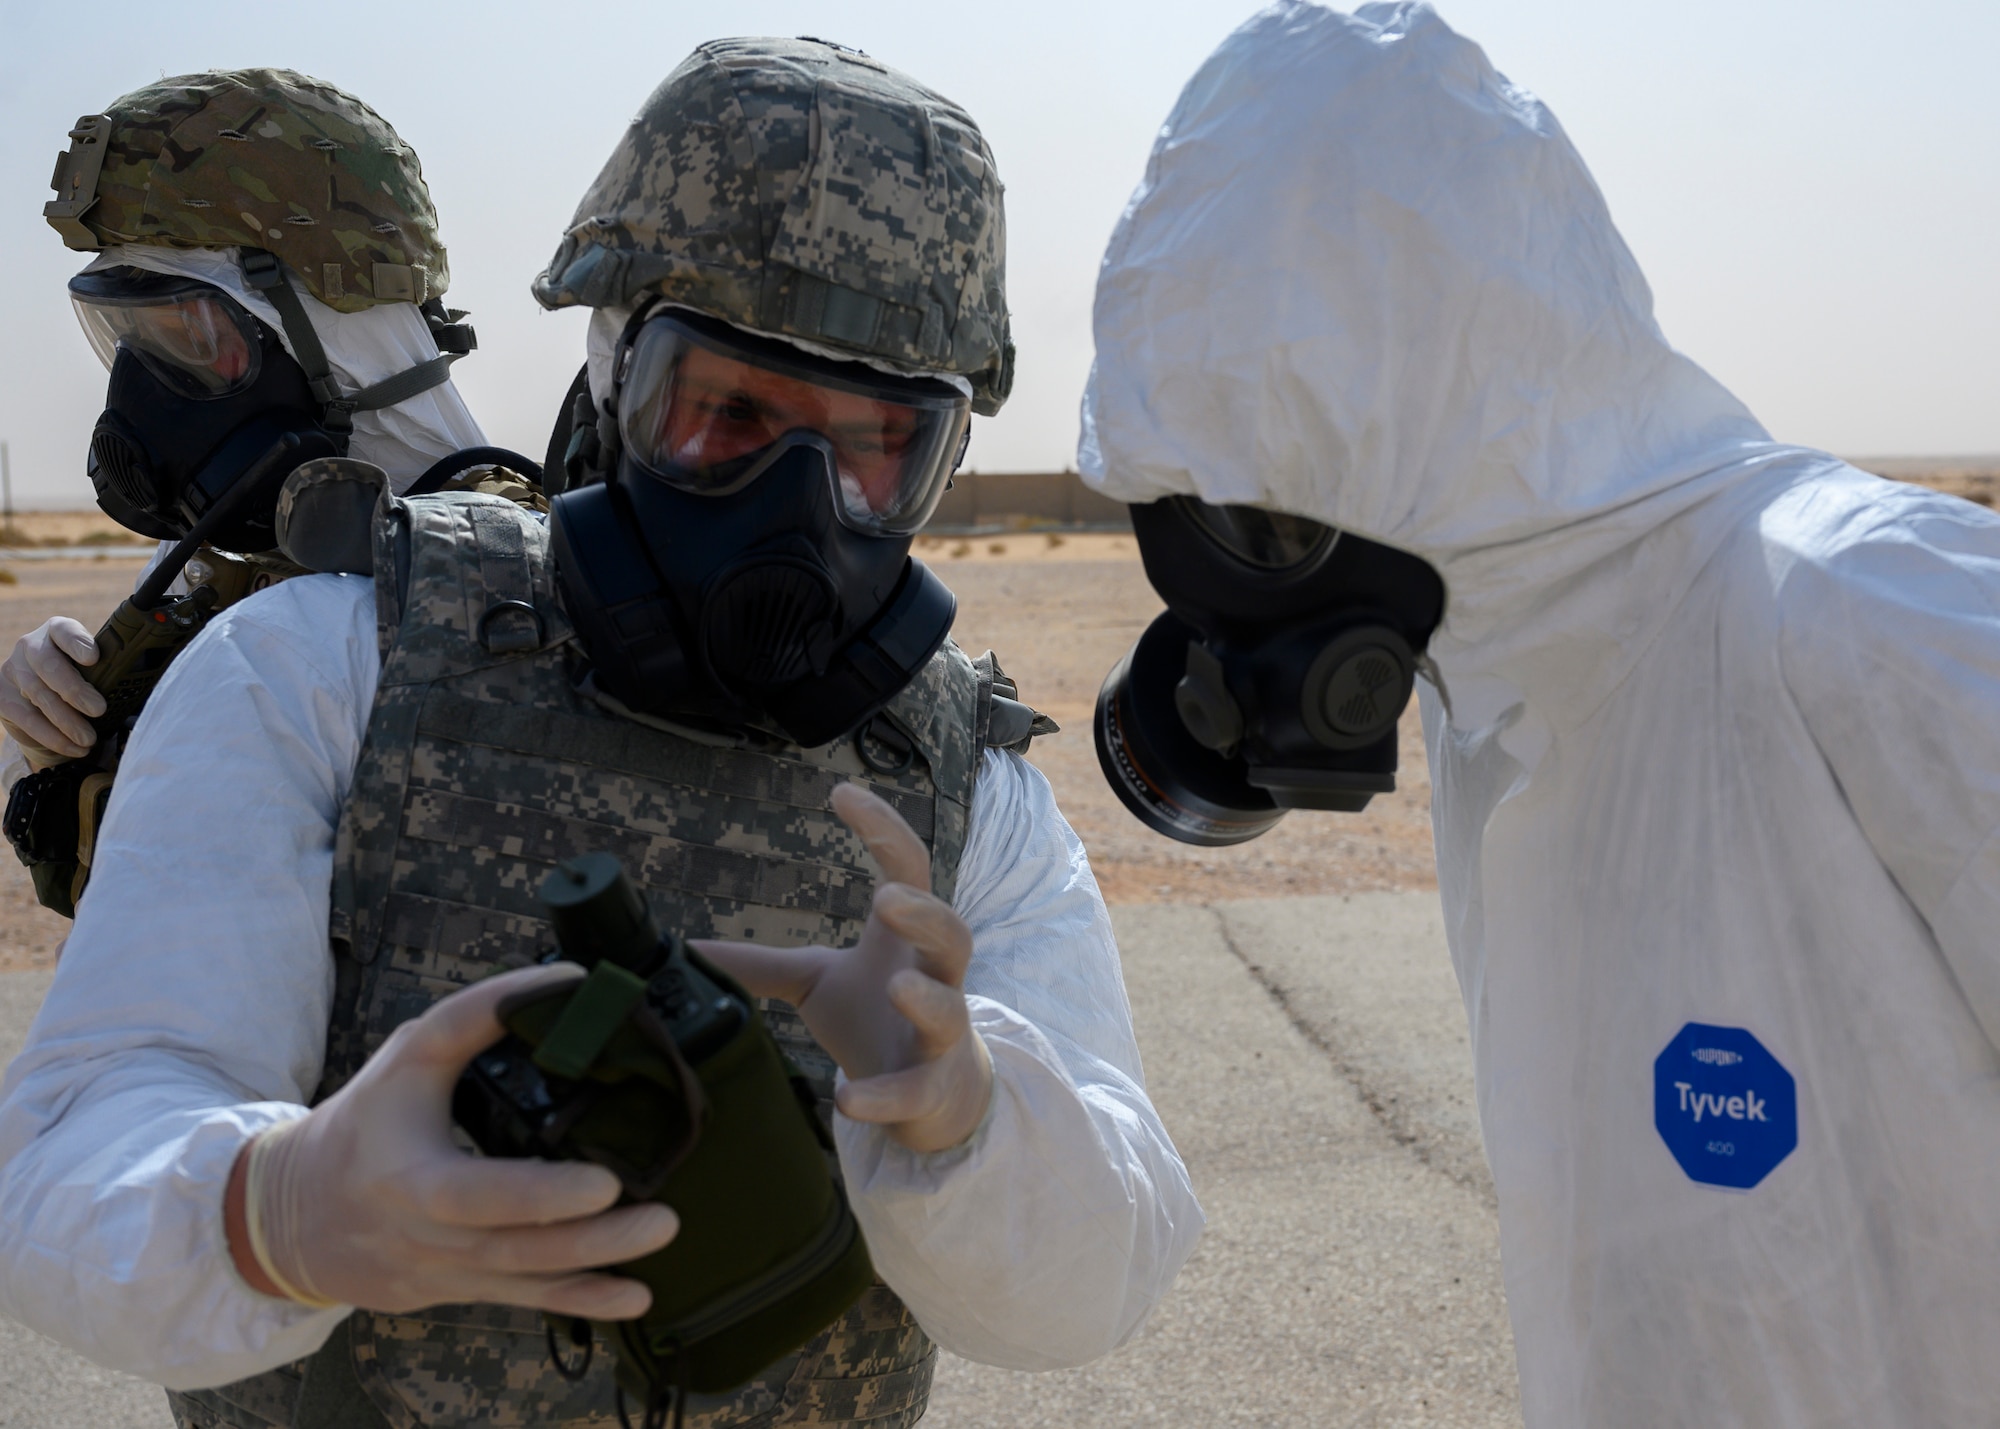 Members of the 378th Civil Engineer Squadron emergency management flight discuss the equipment necessary for a chemical, biological, radiological and nuclear response during an exercise with members of the Royal Saudi Air Force, Prince Sultan Air Base, Kingdom of Saudi Arabia, May 26, 2021. The combined exercise demonstrates the emergency management integration between USAF and RSAF CBRN response units while also familiarizing each unit with the other’s techniques and procedures. (U.S. Air Force photo by Senior Airman Samuel Earick)